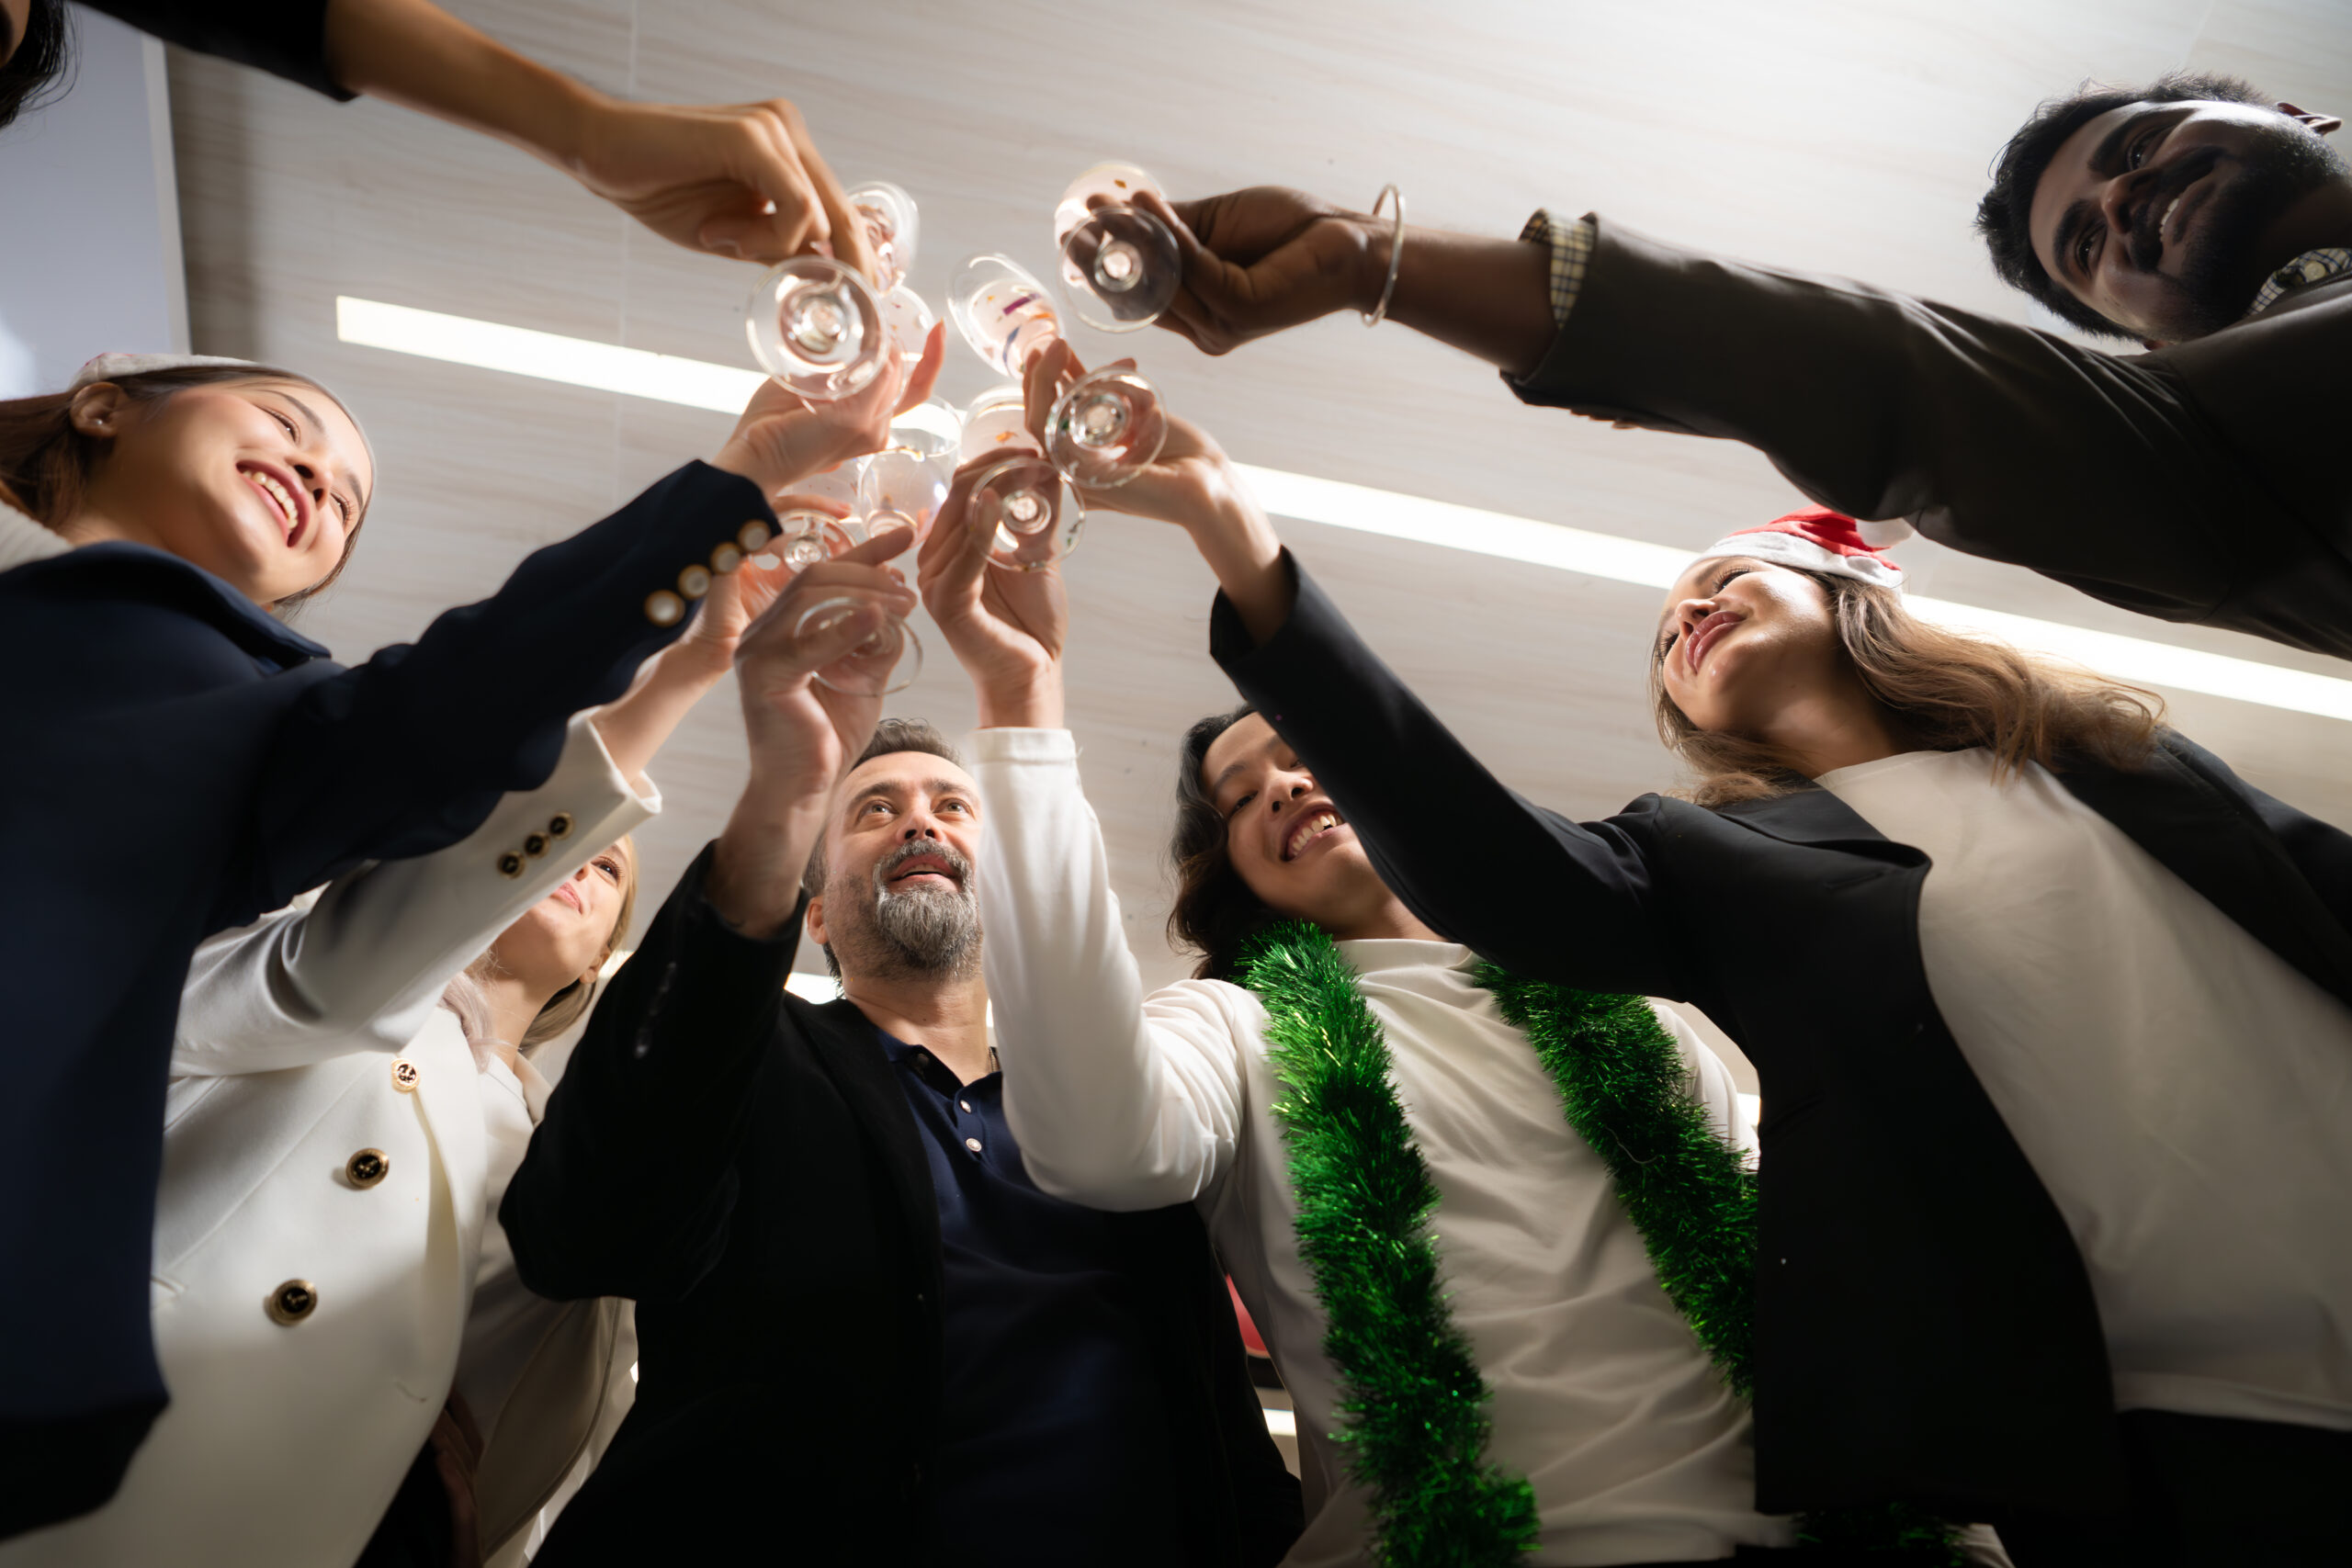 Group of friends toasting with champagne at New Year party in office